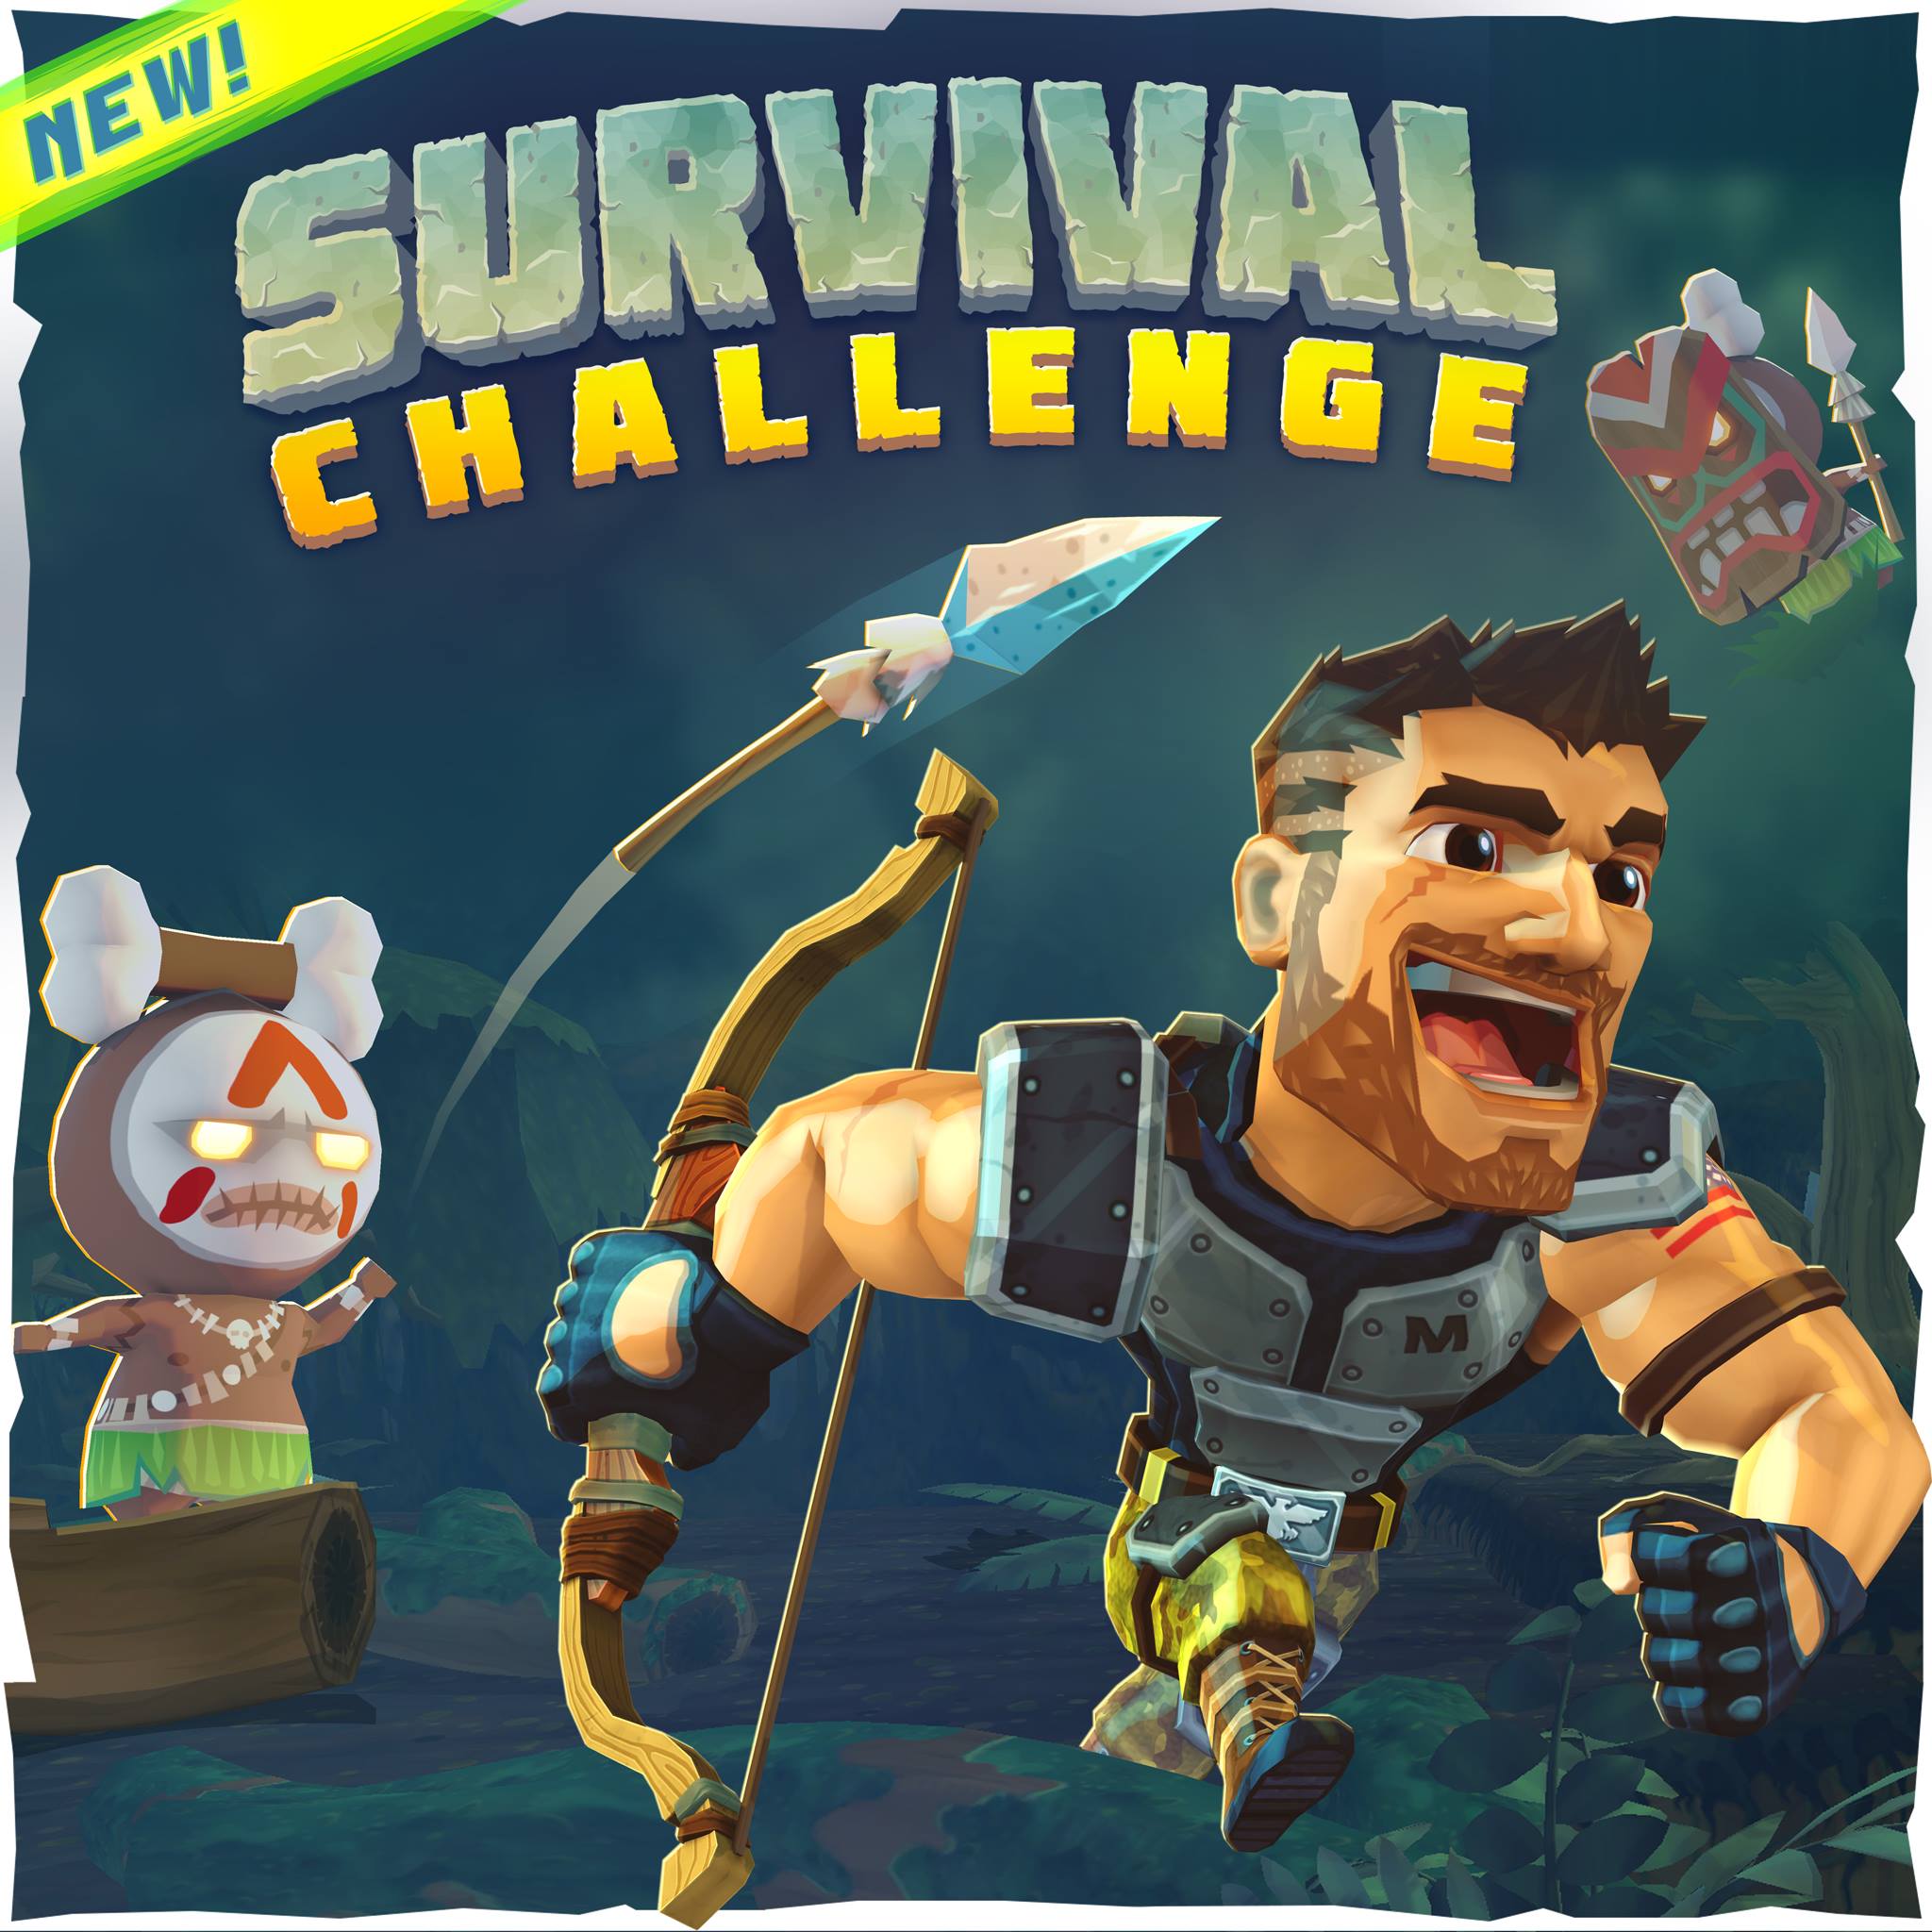 Major Mayhem Have You Played The New Survival Mode Challenge Yet